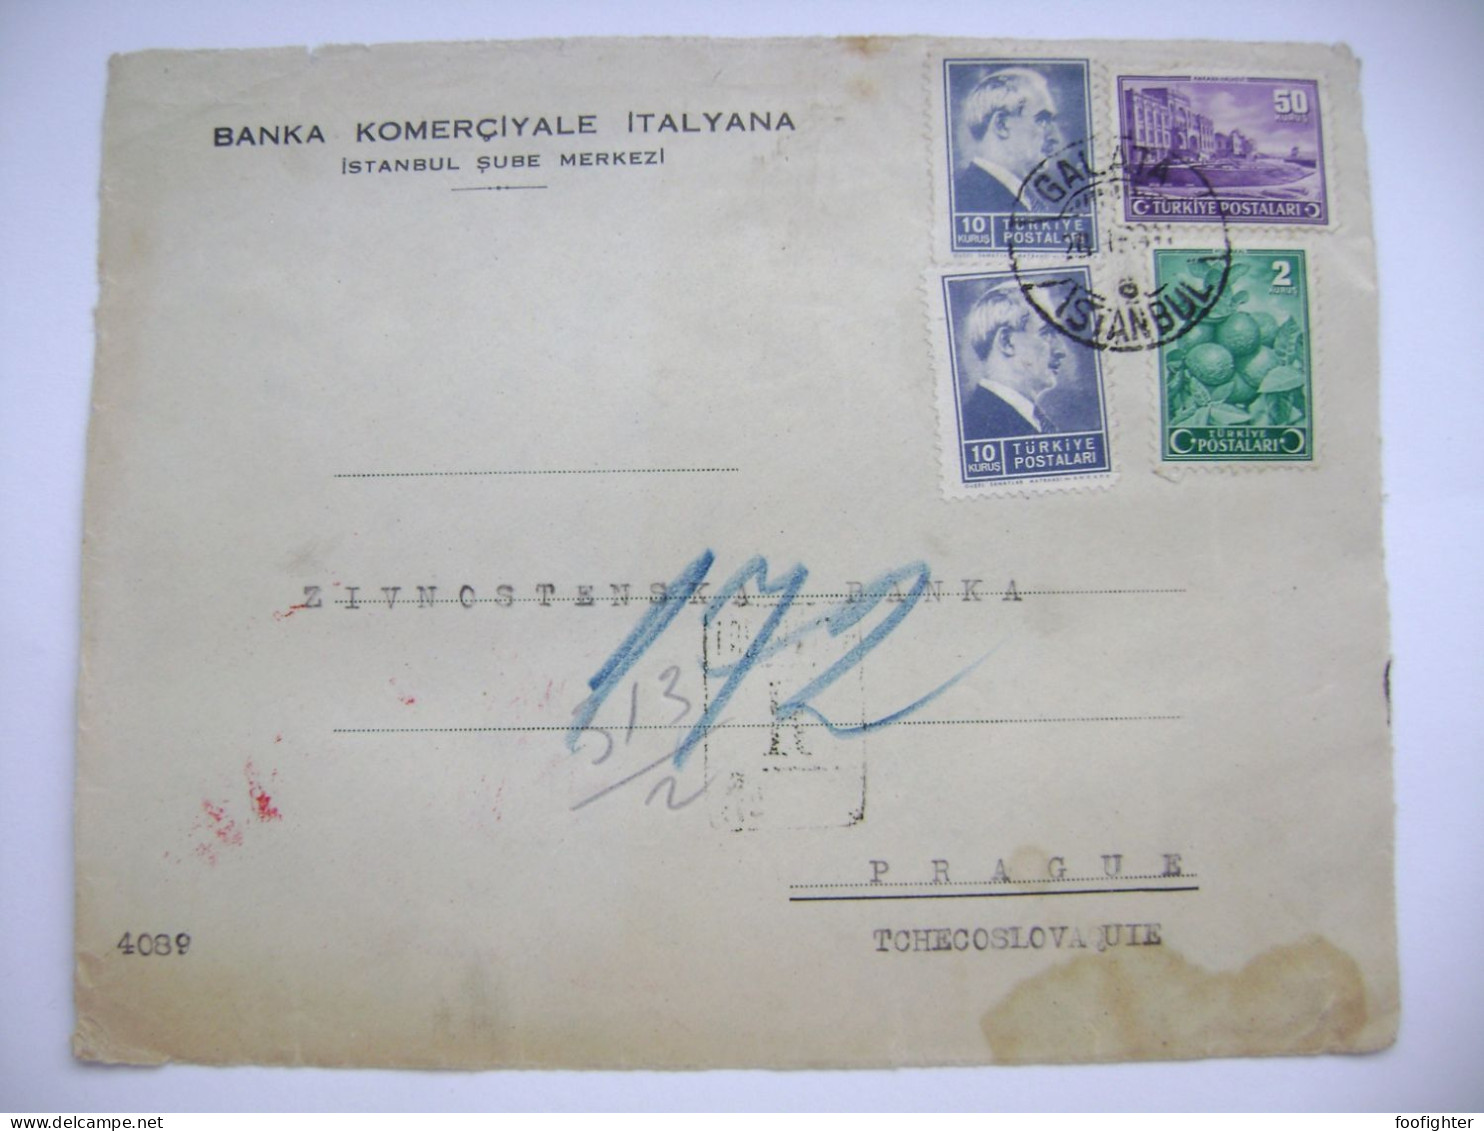 Banka Komerciale Italyana, Galata Istanbul 1940s, 2x 10 + 50 + 2 Kurus - Front Side From Cover Only - To Czechoslovakia - Covers & Documents